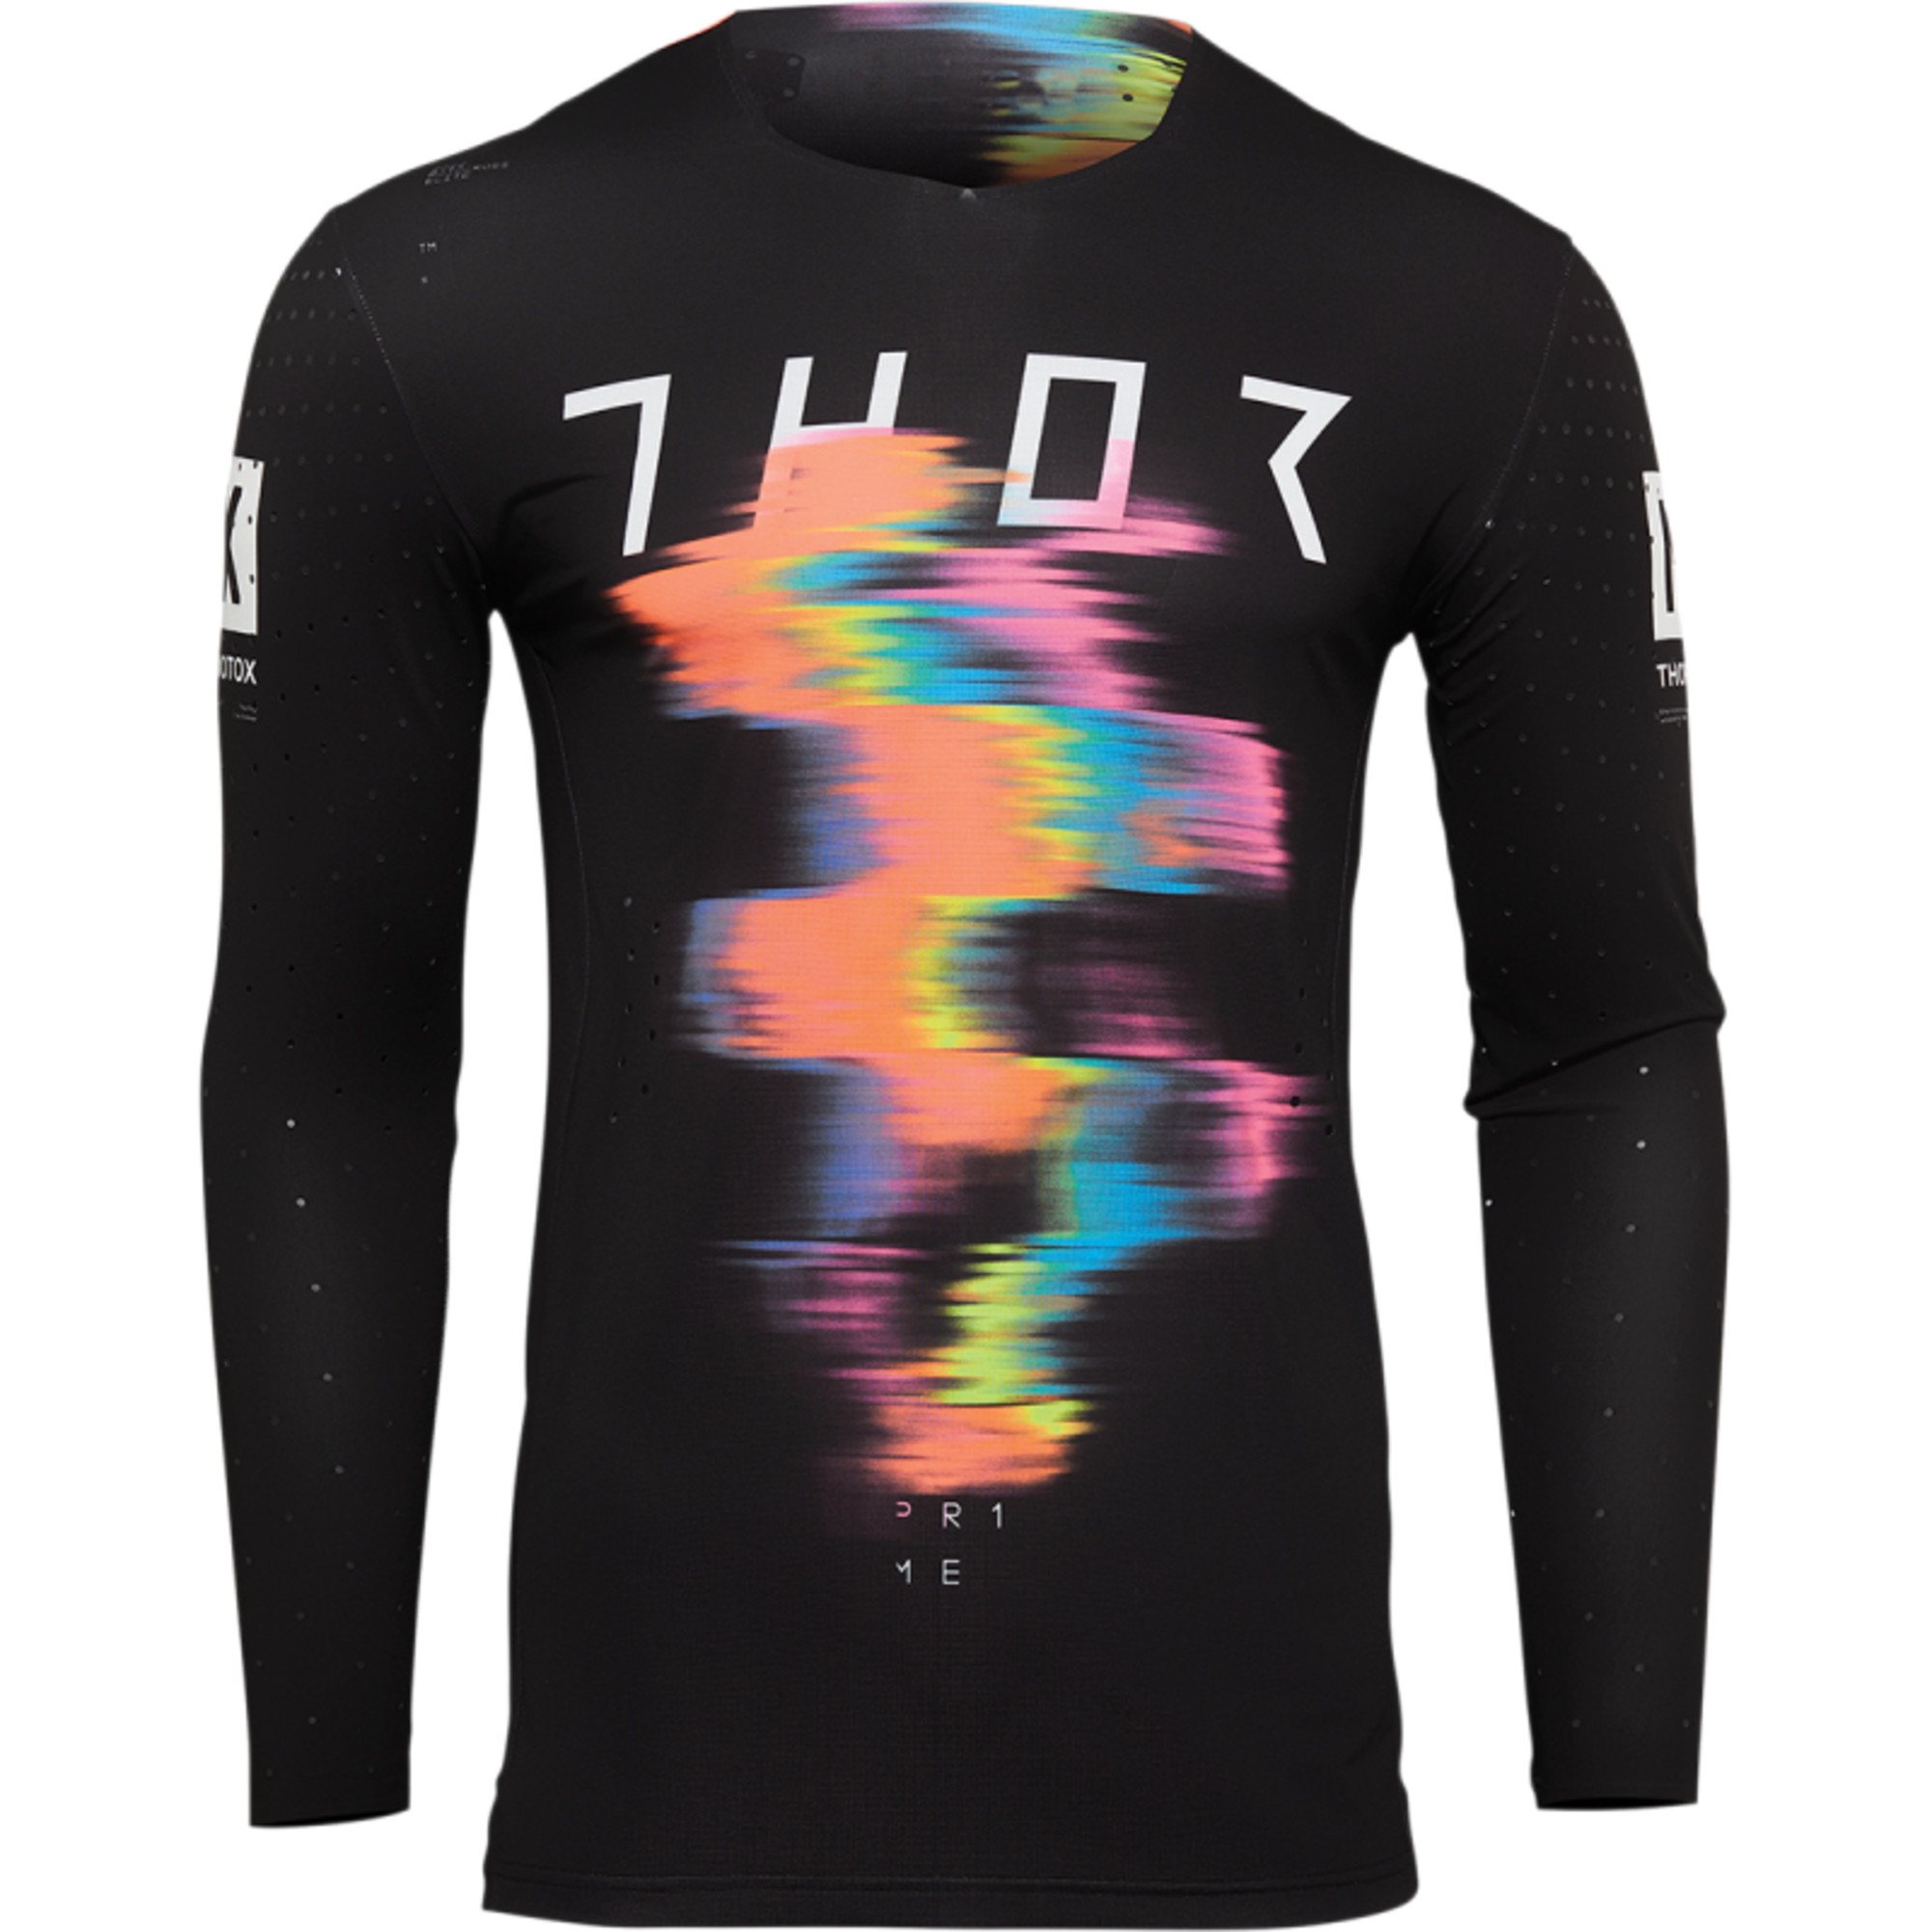 thor jerseys for men prime pro theory